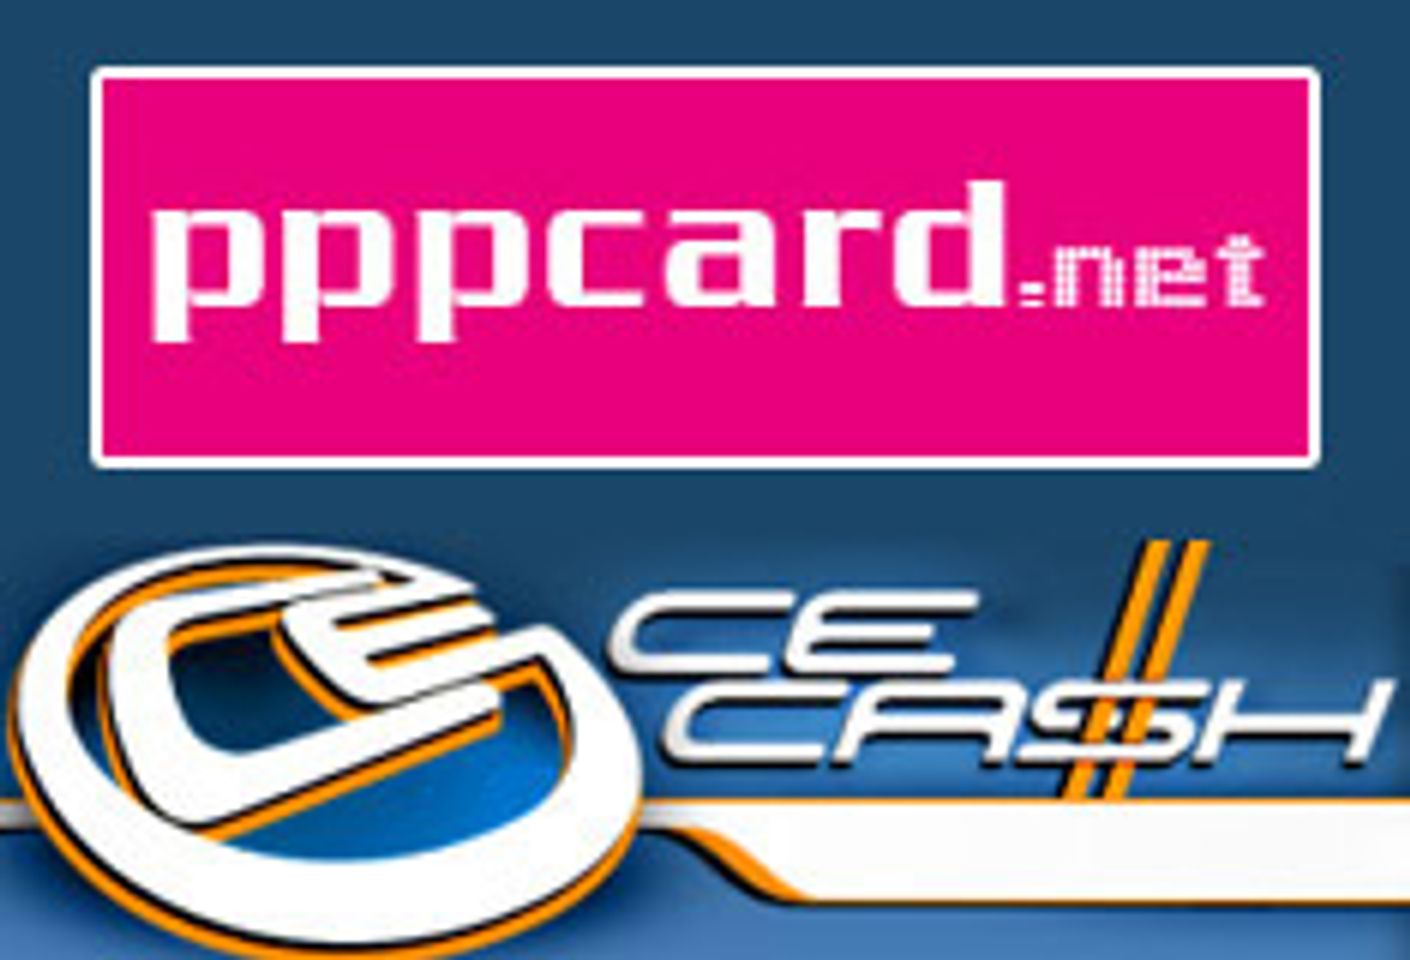 CECash Adds PPPcard